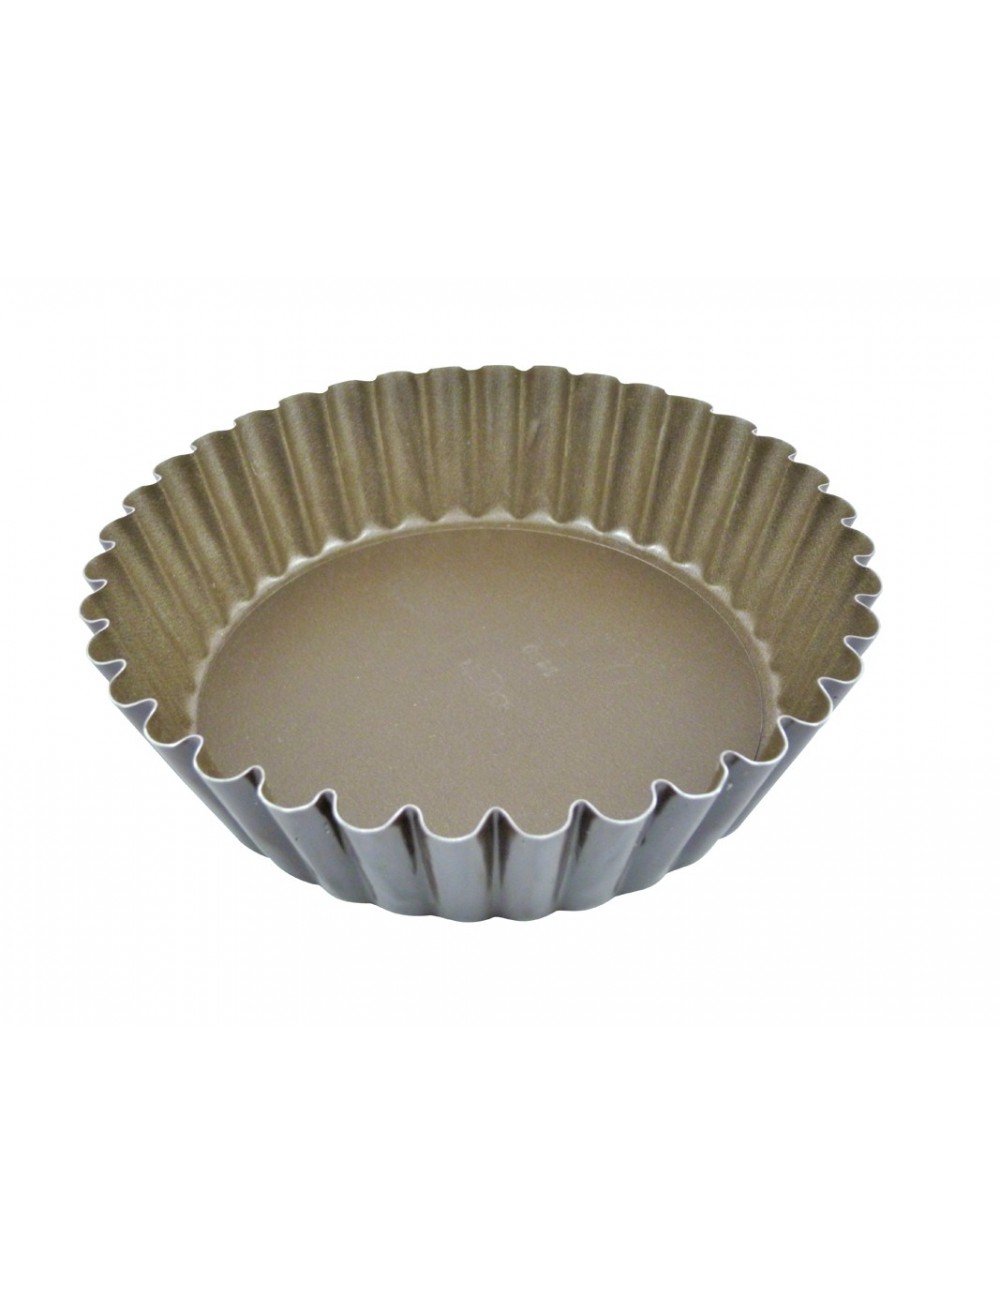 ROUND FLUTED LOOSE BASE MOULD - NON-STICK COATING - REMOVABLE BASE